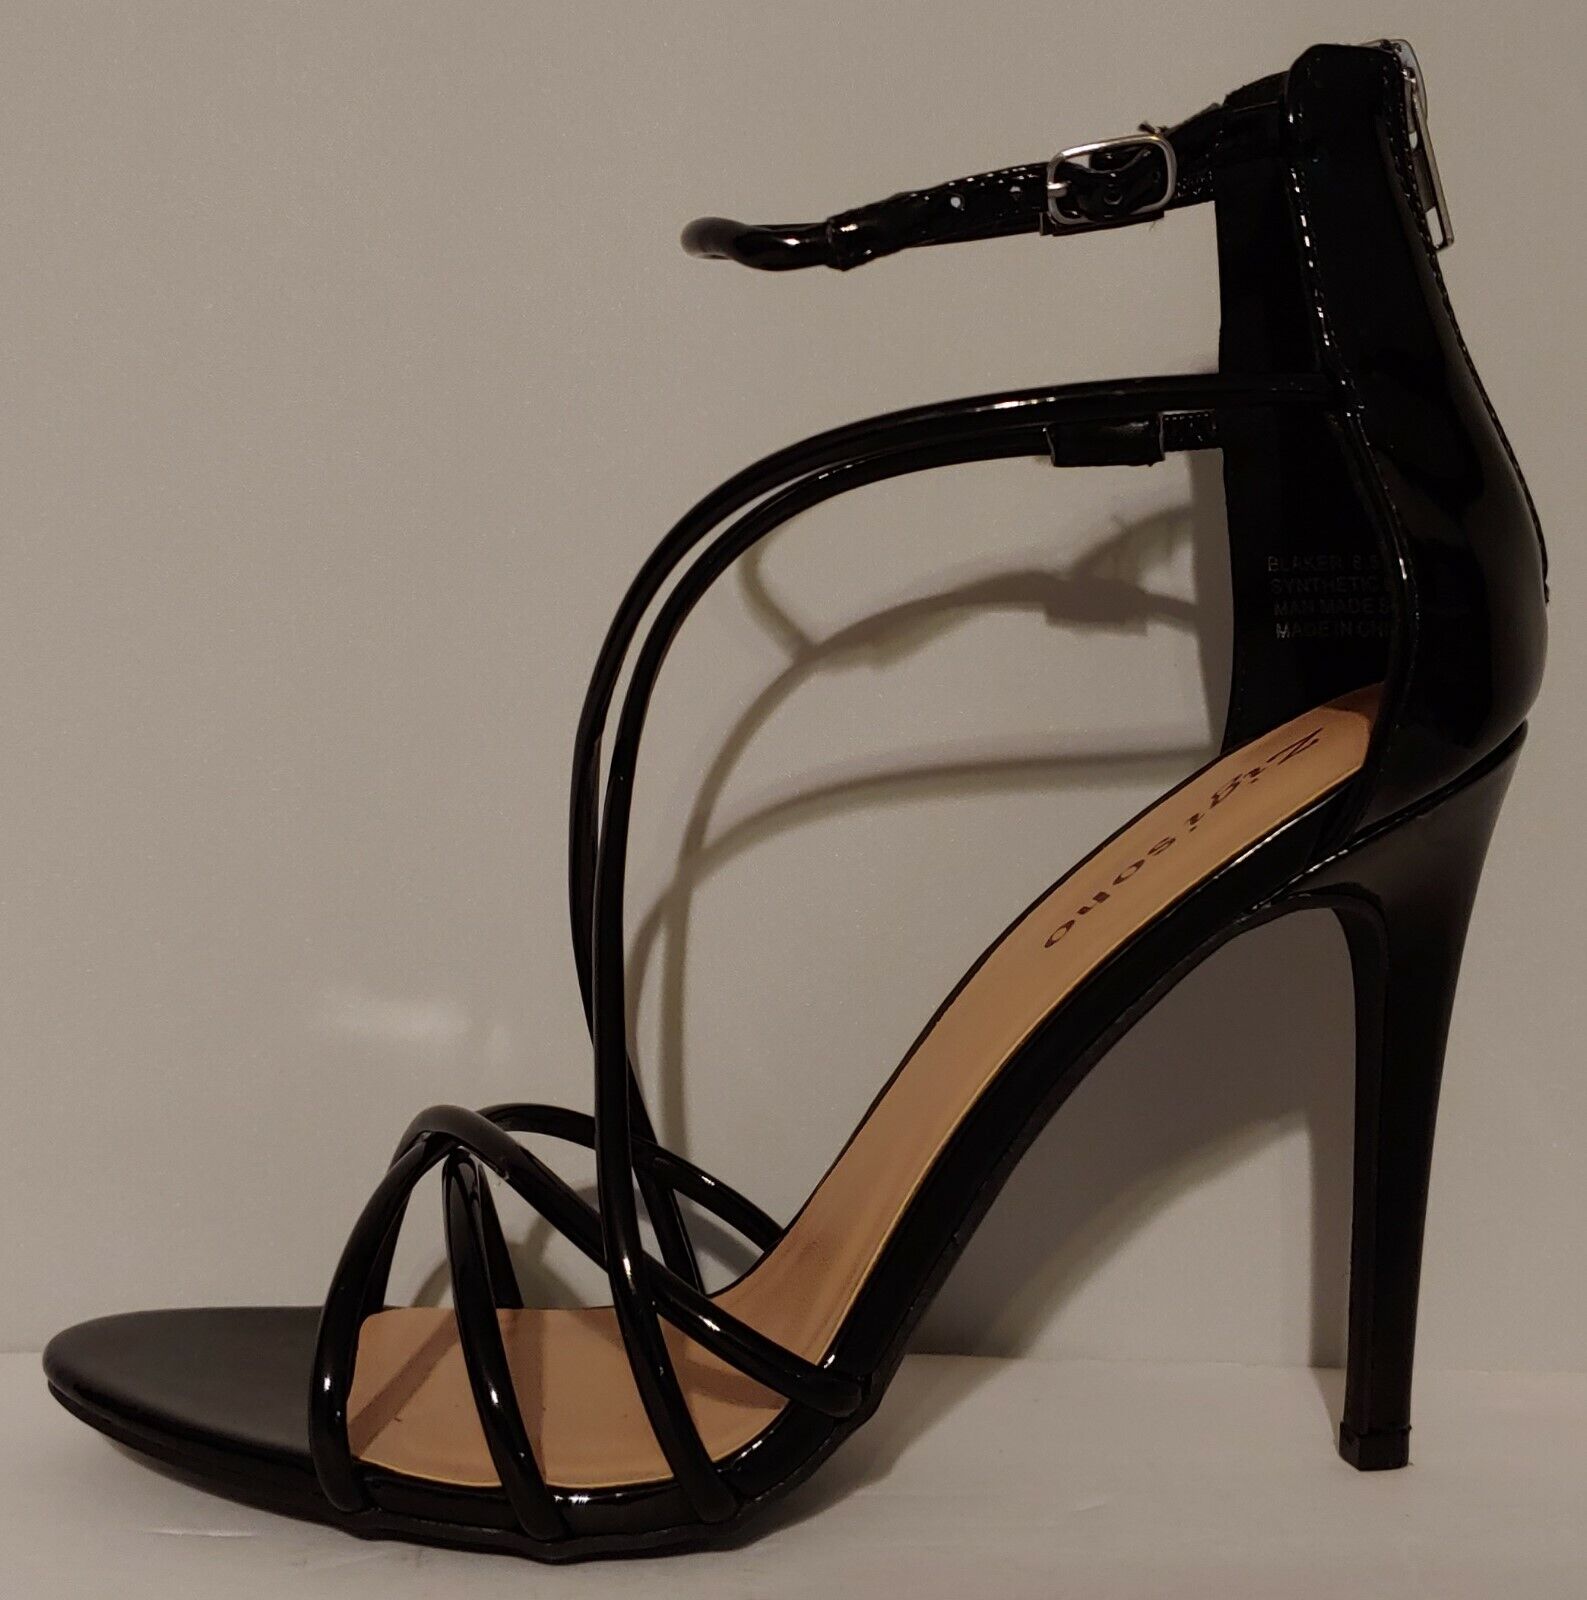 NEW At the price Zigisoho Blaker Black Patent New color Sandals 8. 4quot; Size Heels